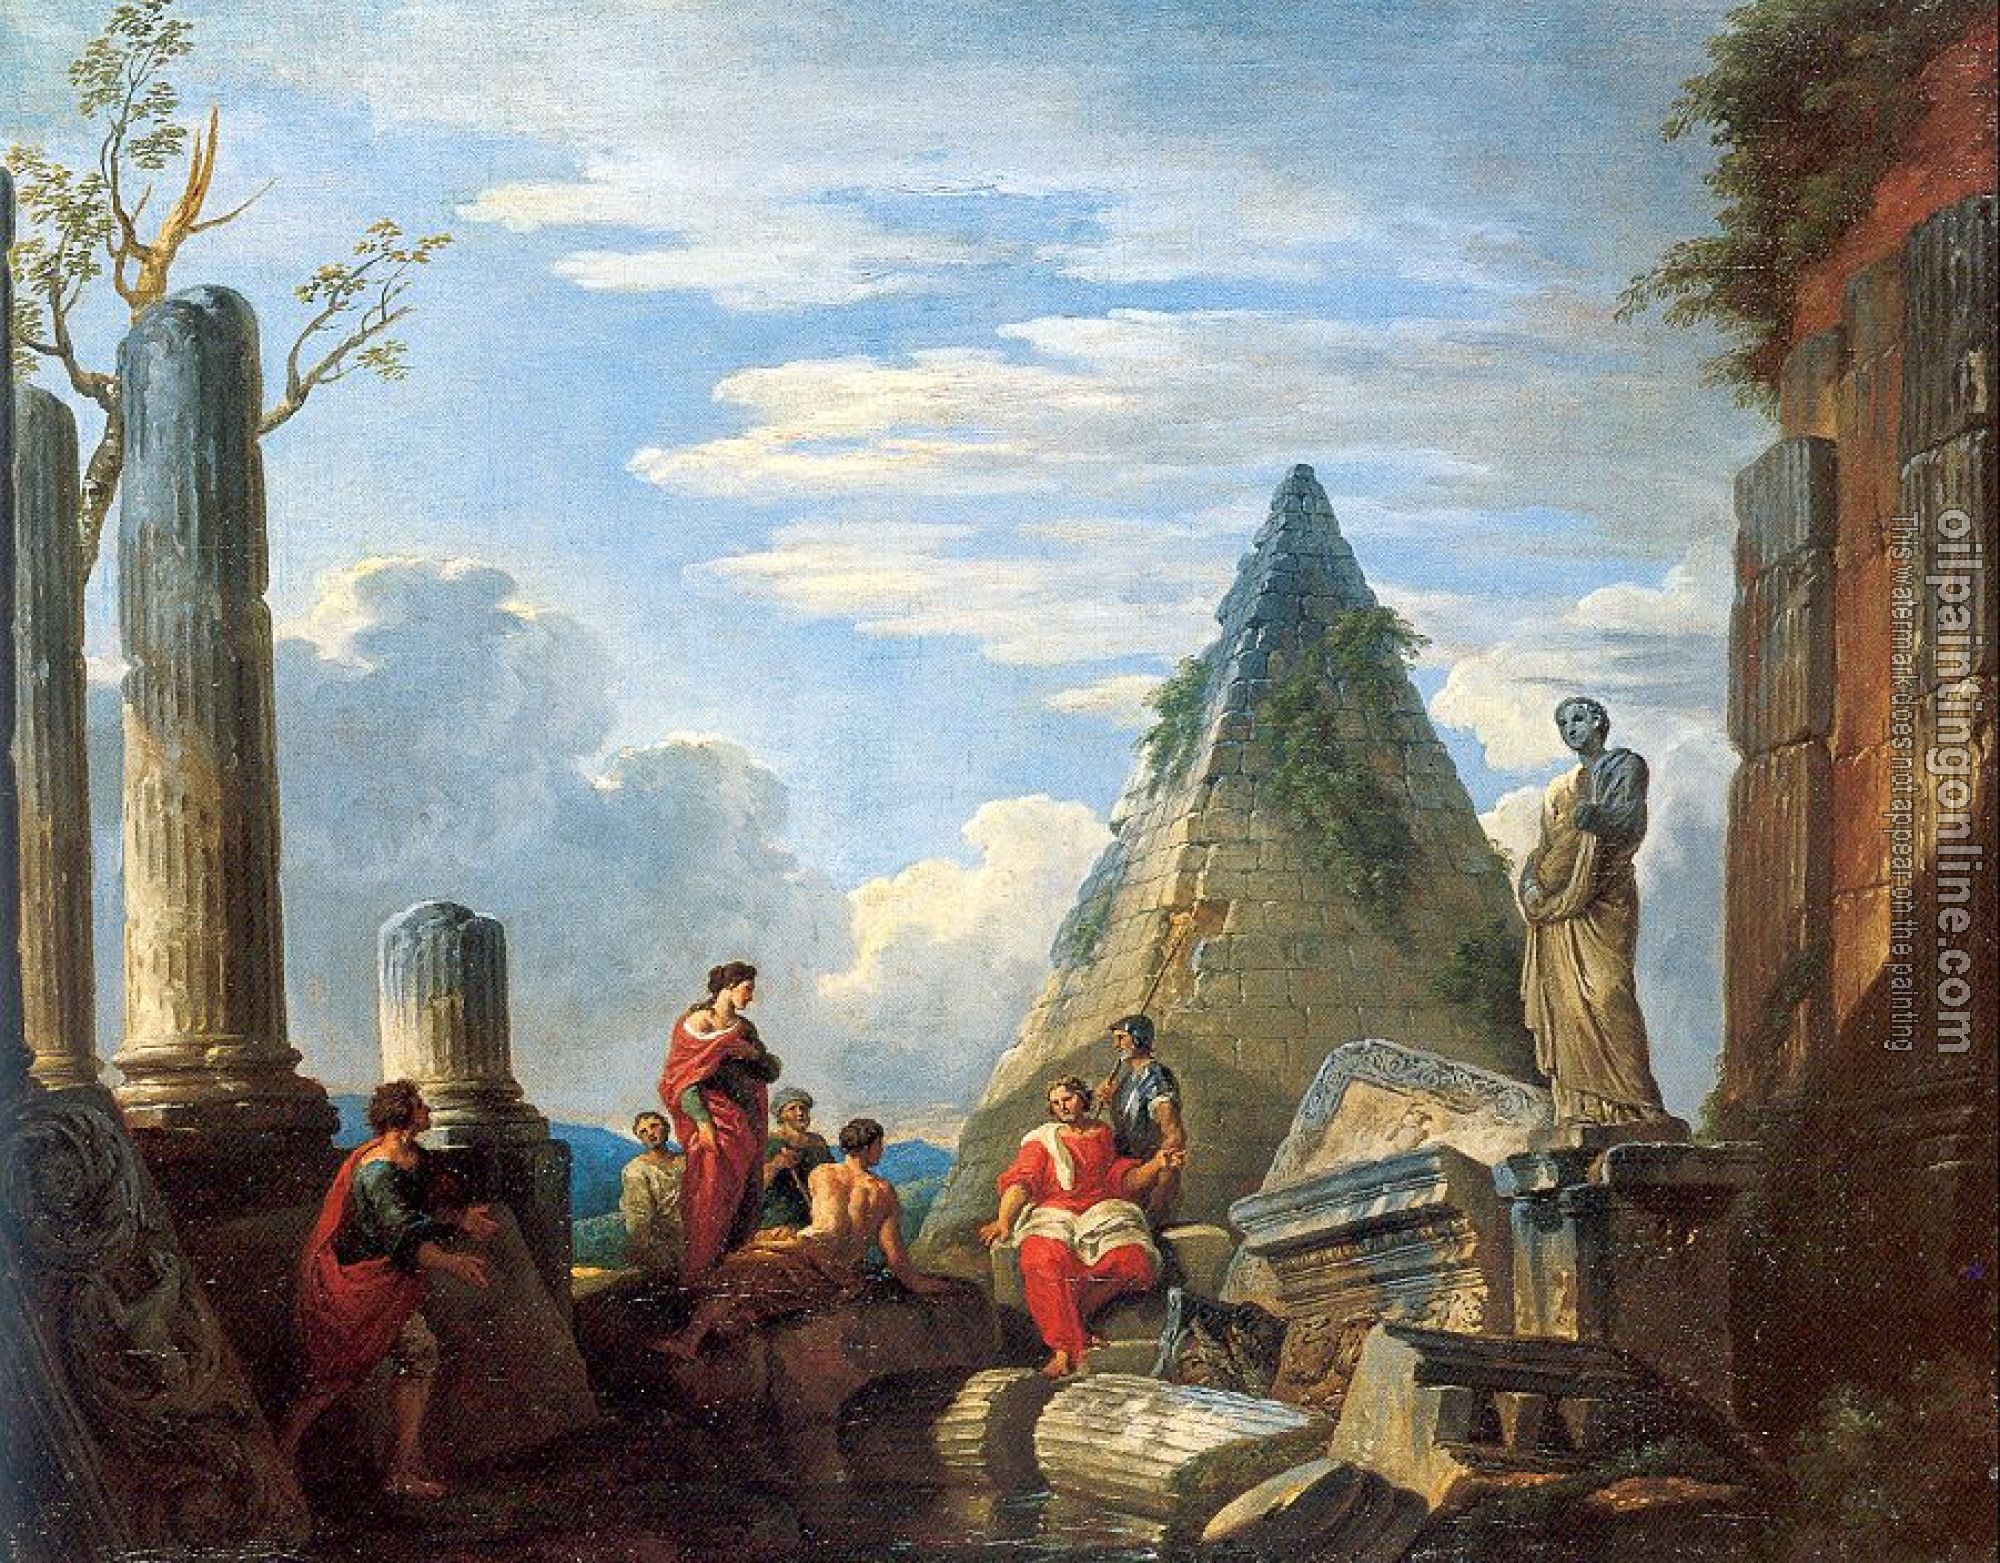 Panini, Giovanni Paolo - Roman Ruins with Figures